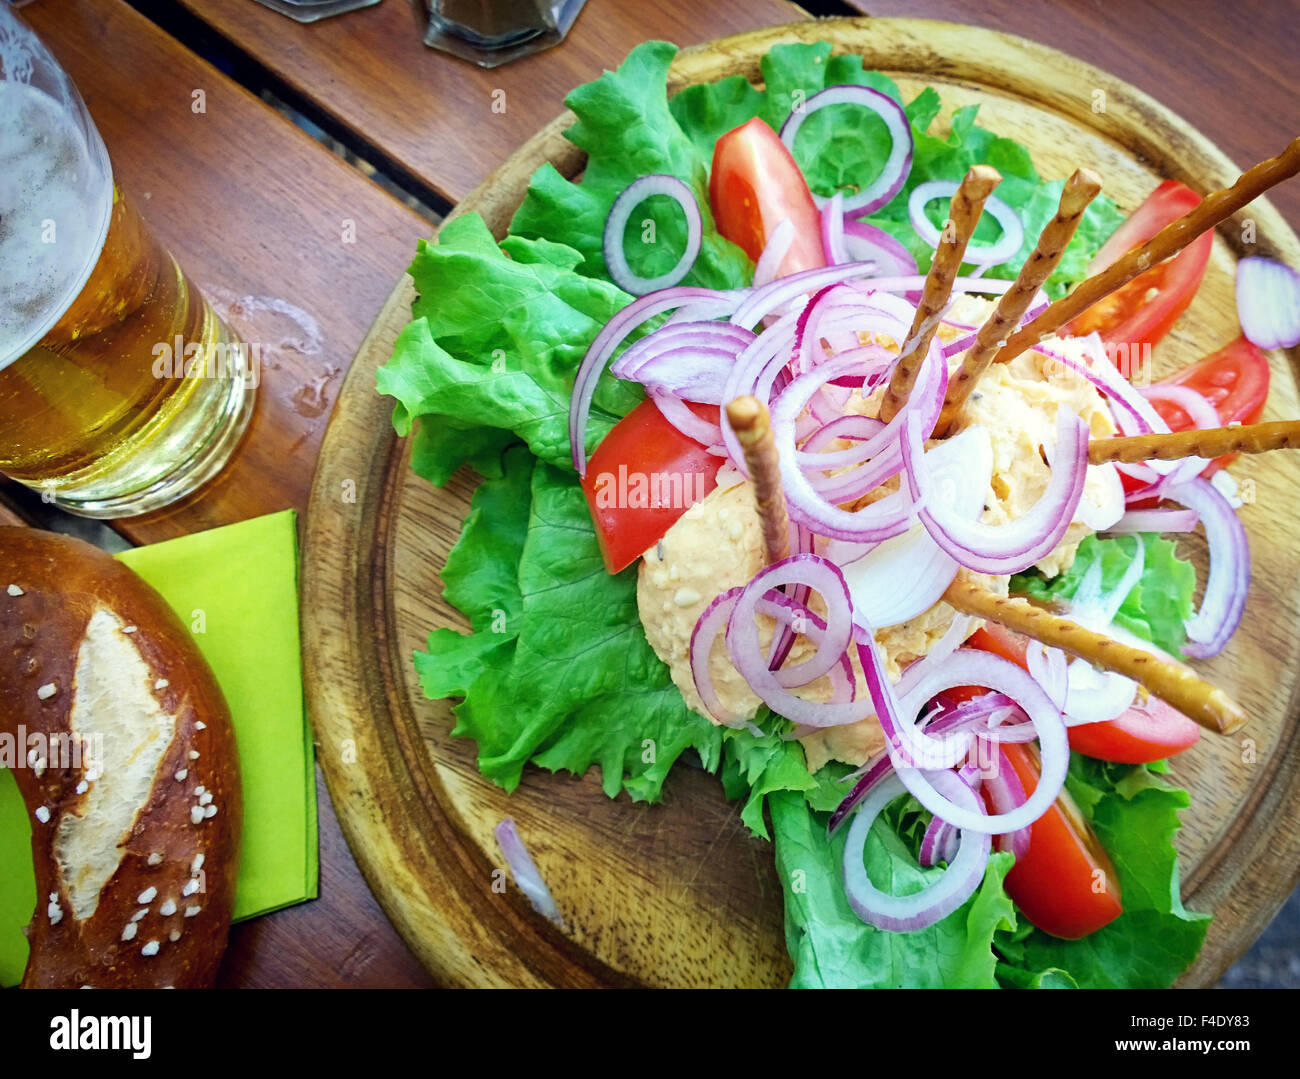 Obazda, Bavarian cheese cream specialty served with onion rings tomatoes,salad, salty sticks, pretzel and beer Stock Photo